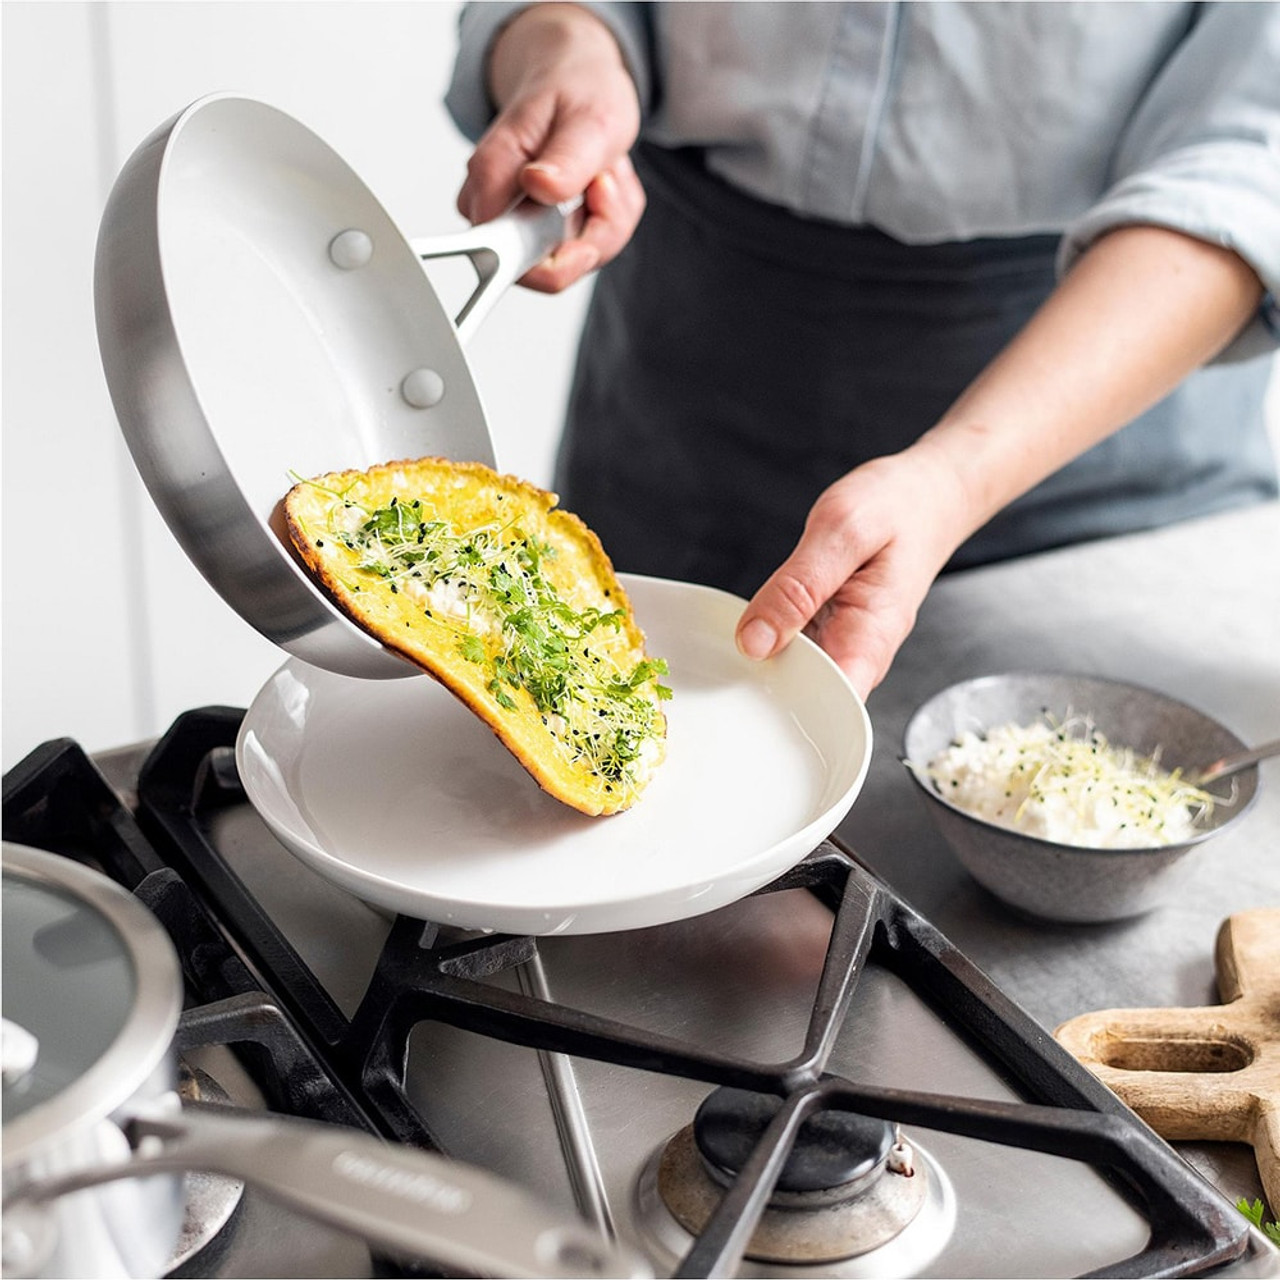 https://cdn11.bigcommerce.com/s-hccytny0od/images/stencil/1280x1280/products/2907/10265/greenpan-venice-pro-fry-pan-set-8-10in-2__57325.1592059073.jpg?c=2?imbypass=on